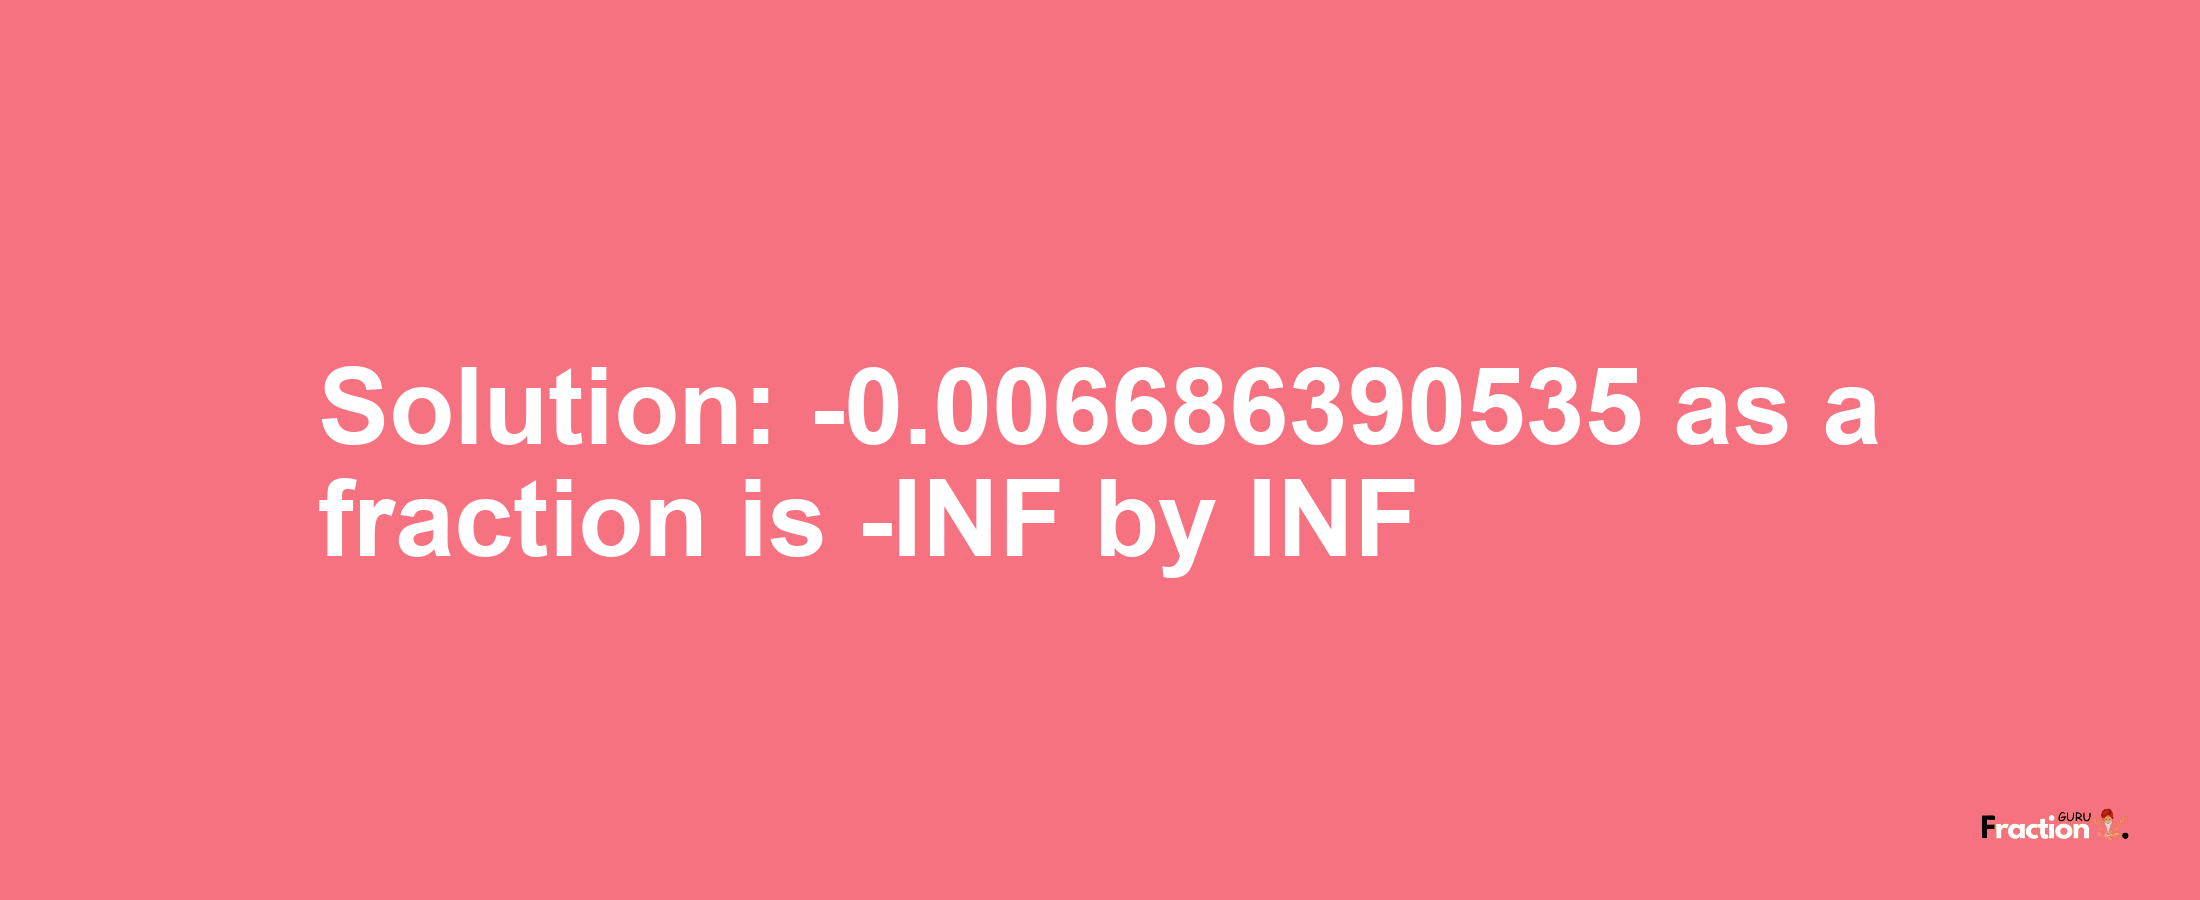 Solution:-0.006686390535 as a fraction is -INF/INF